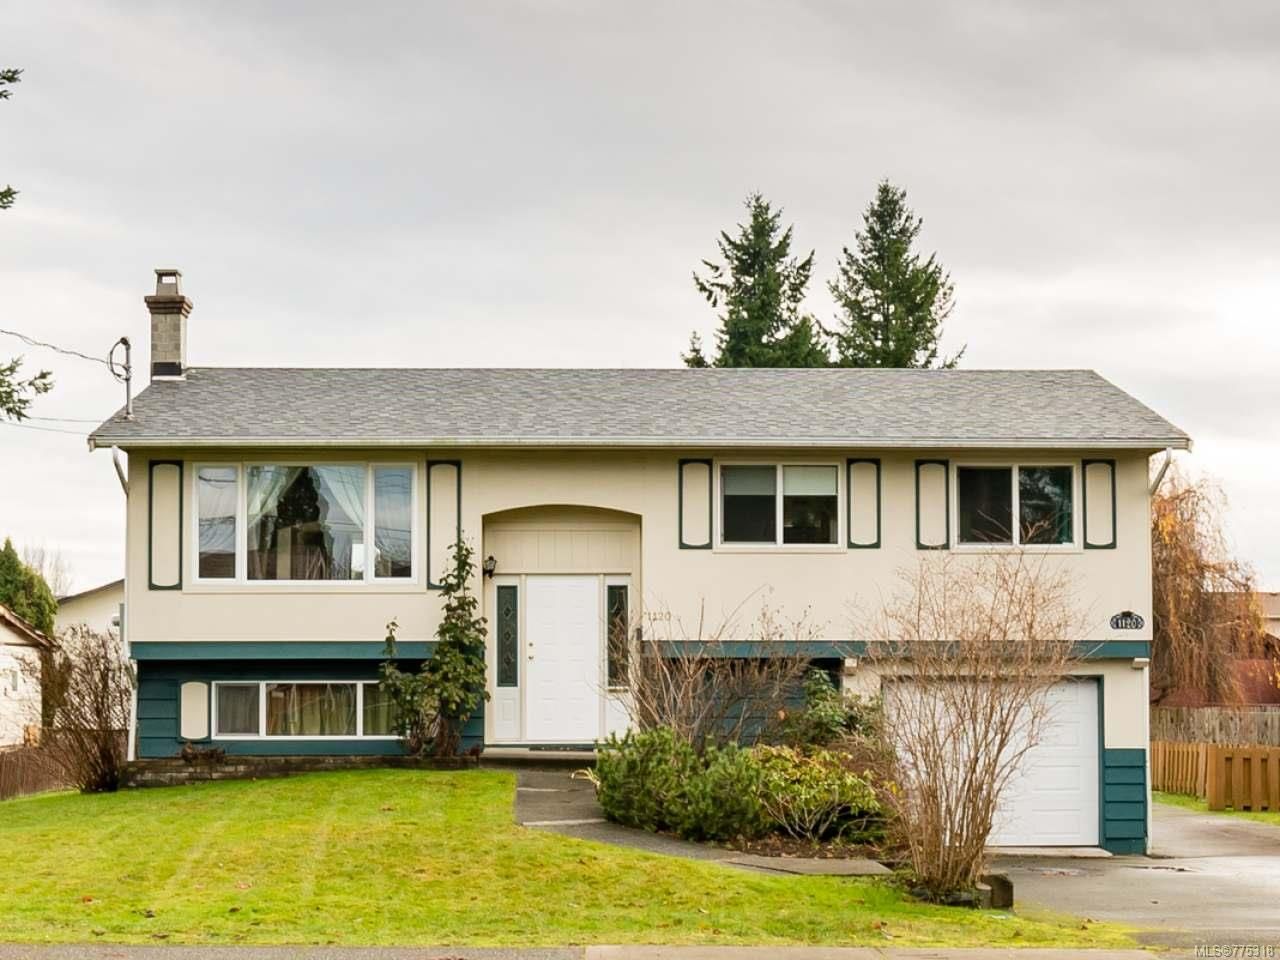 Main Photo: 1120 21ST STREET in COURTENAY: CV Courtenay City House for sale (Comox Valley)  : MLS®# 775318